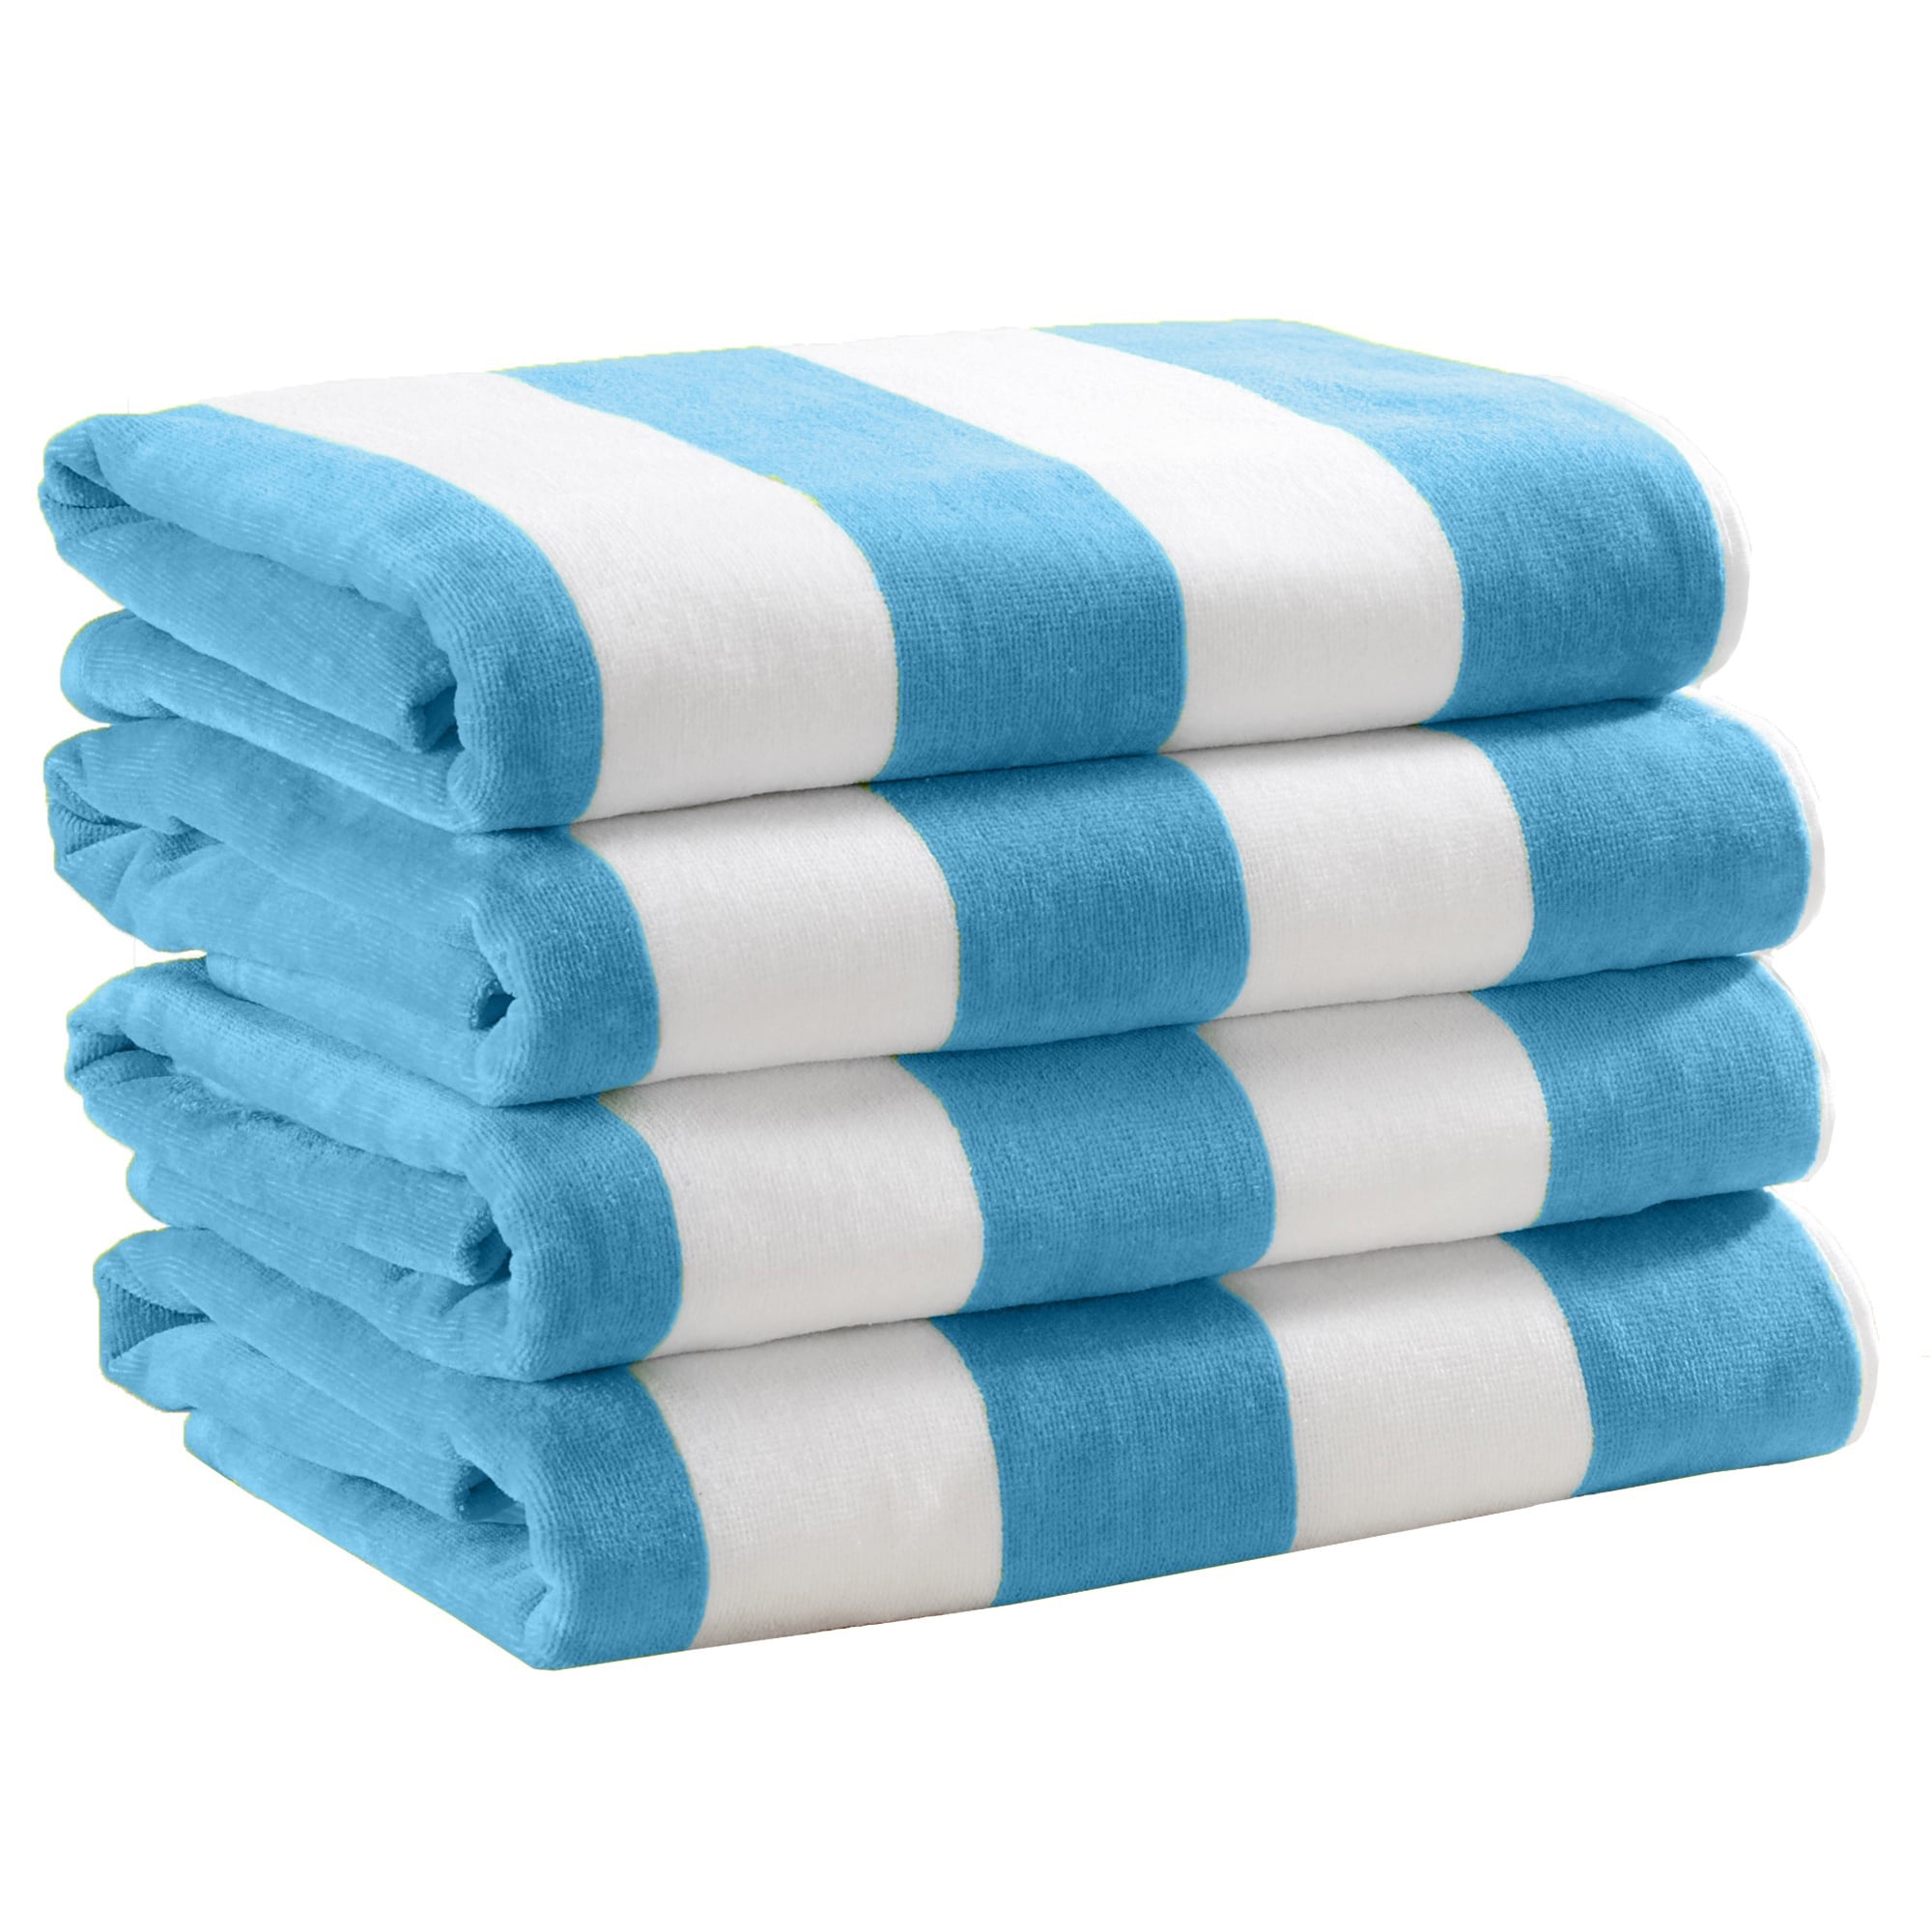 Voova & MOVAS 4Pack XL Large Bath Towels for Adults(34X68) - Cotton - Oversized Pool Beach Towels - Soft and Perfect Travel Towel for Men and